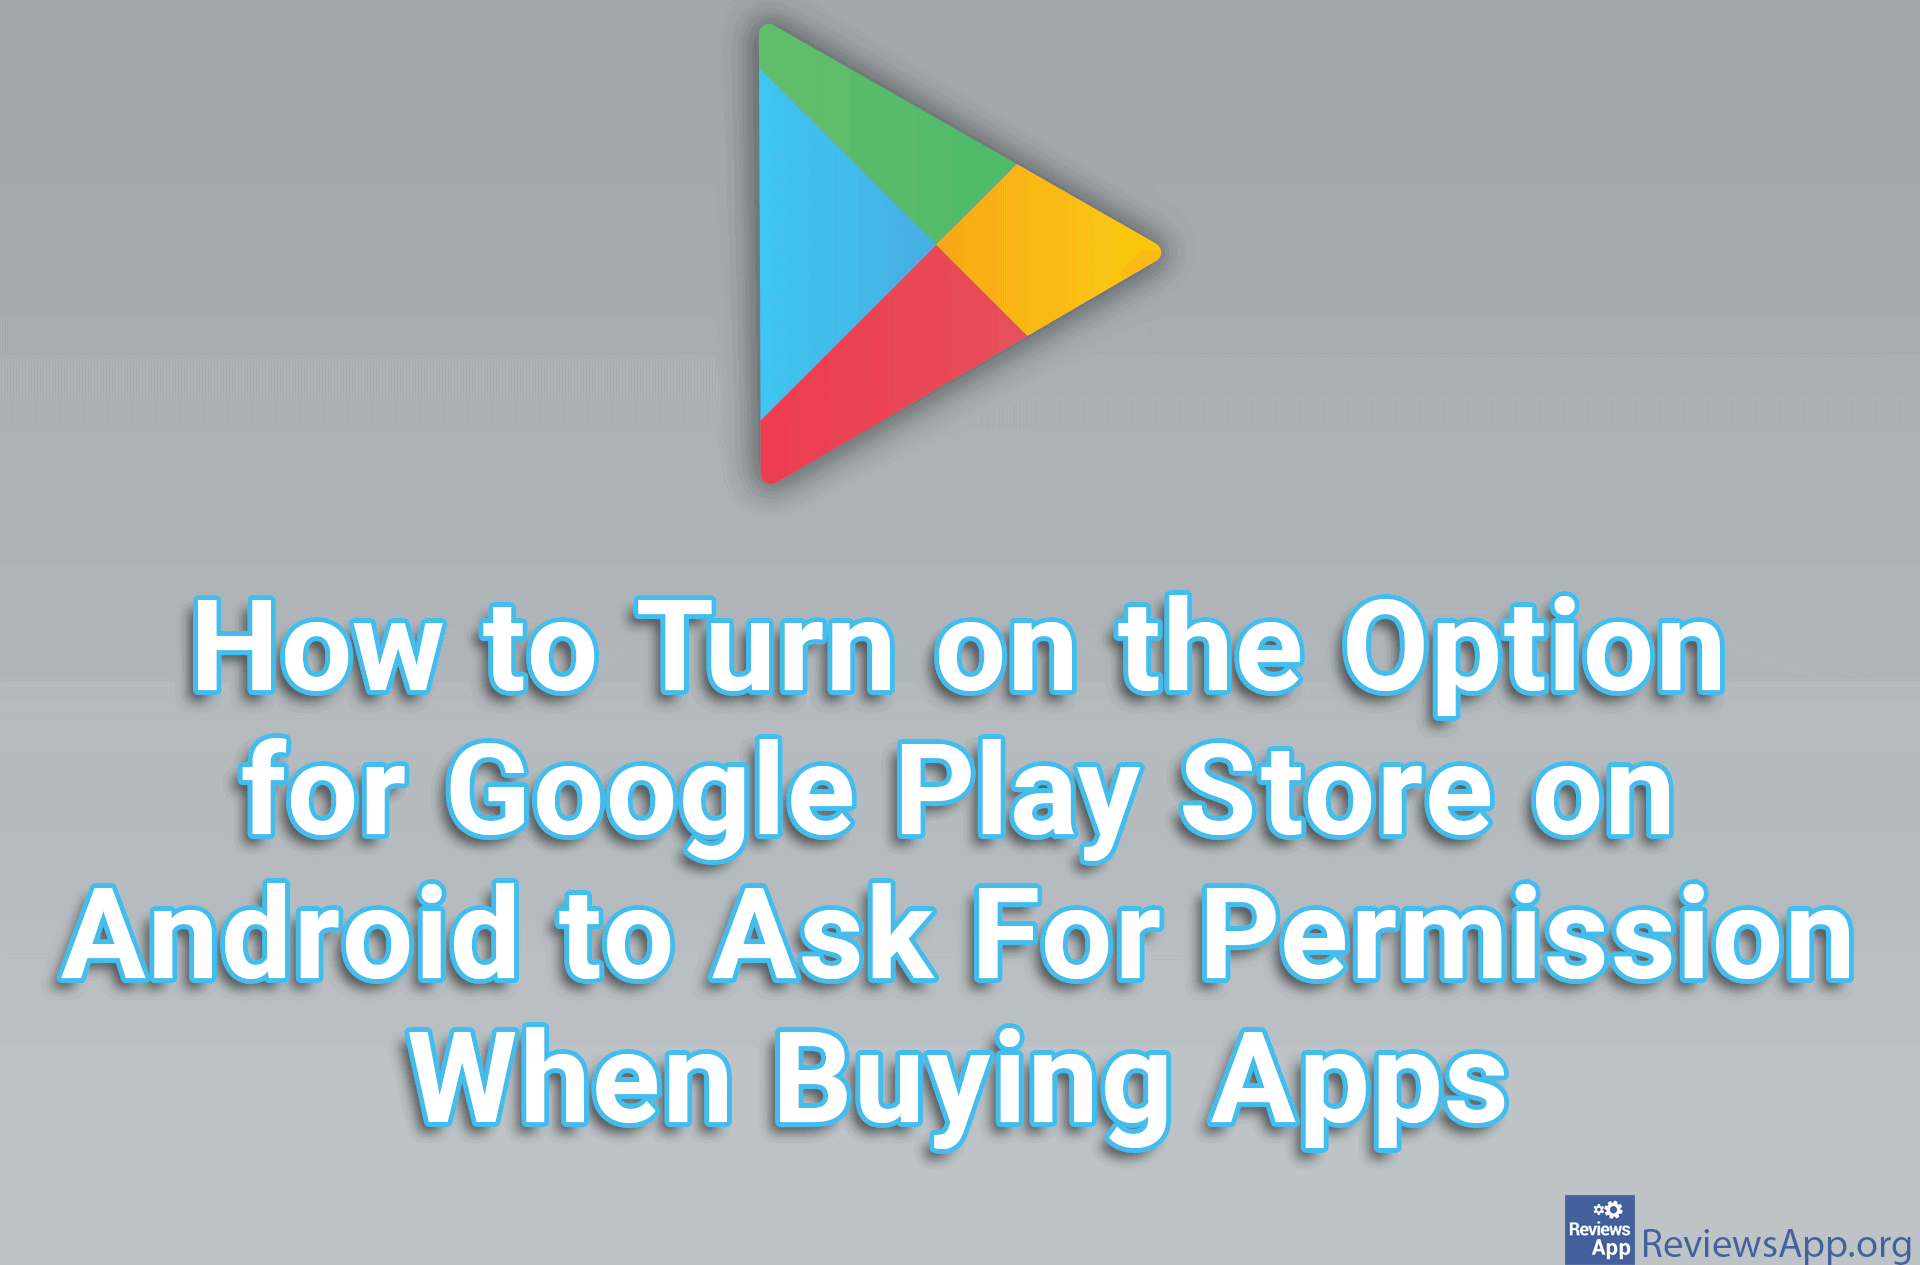 How to Turn on the Option for Google Play Store on Android to Ask For Permission When Buying Apps